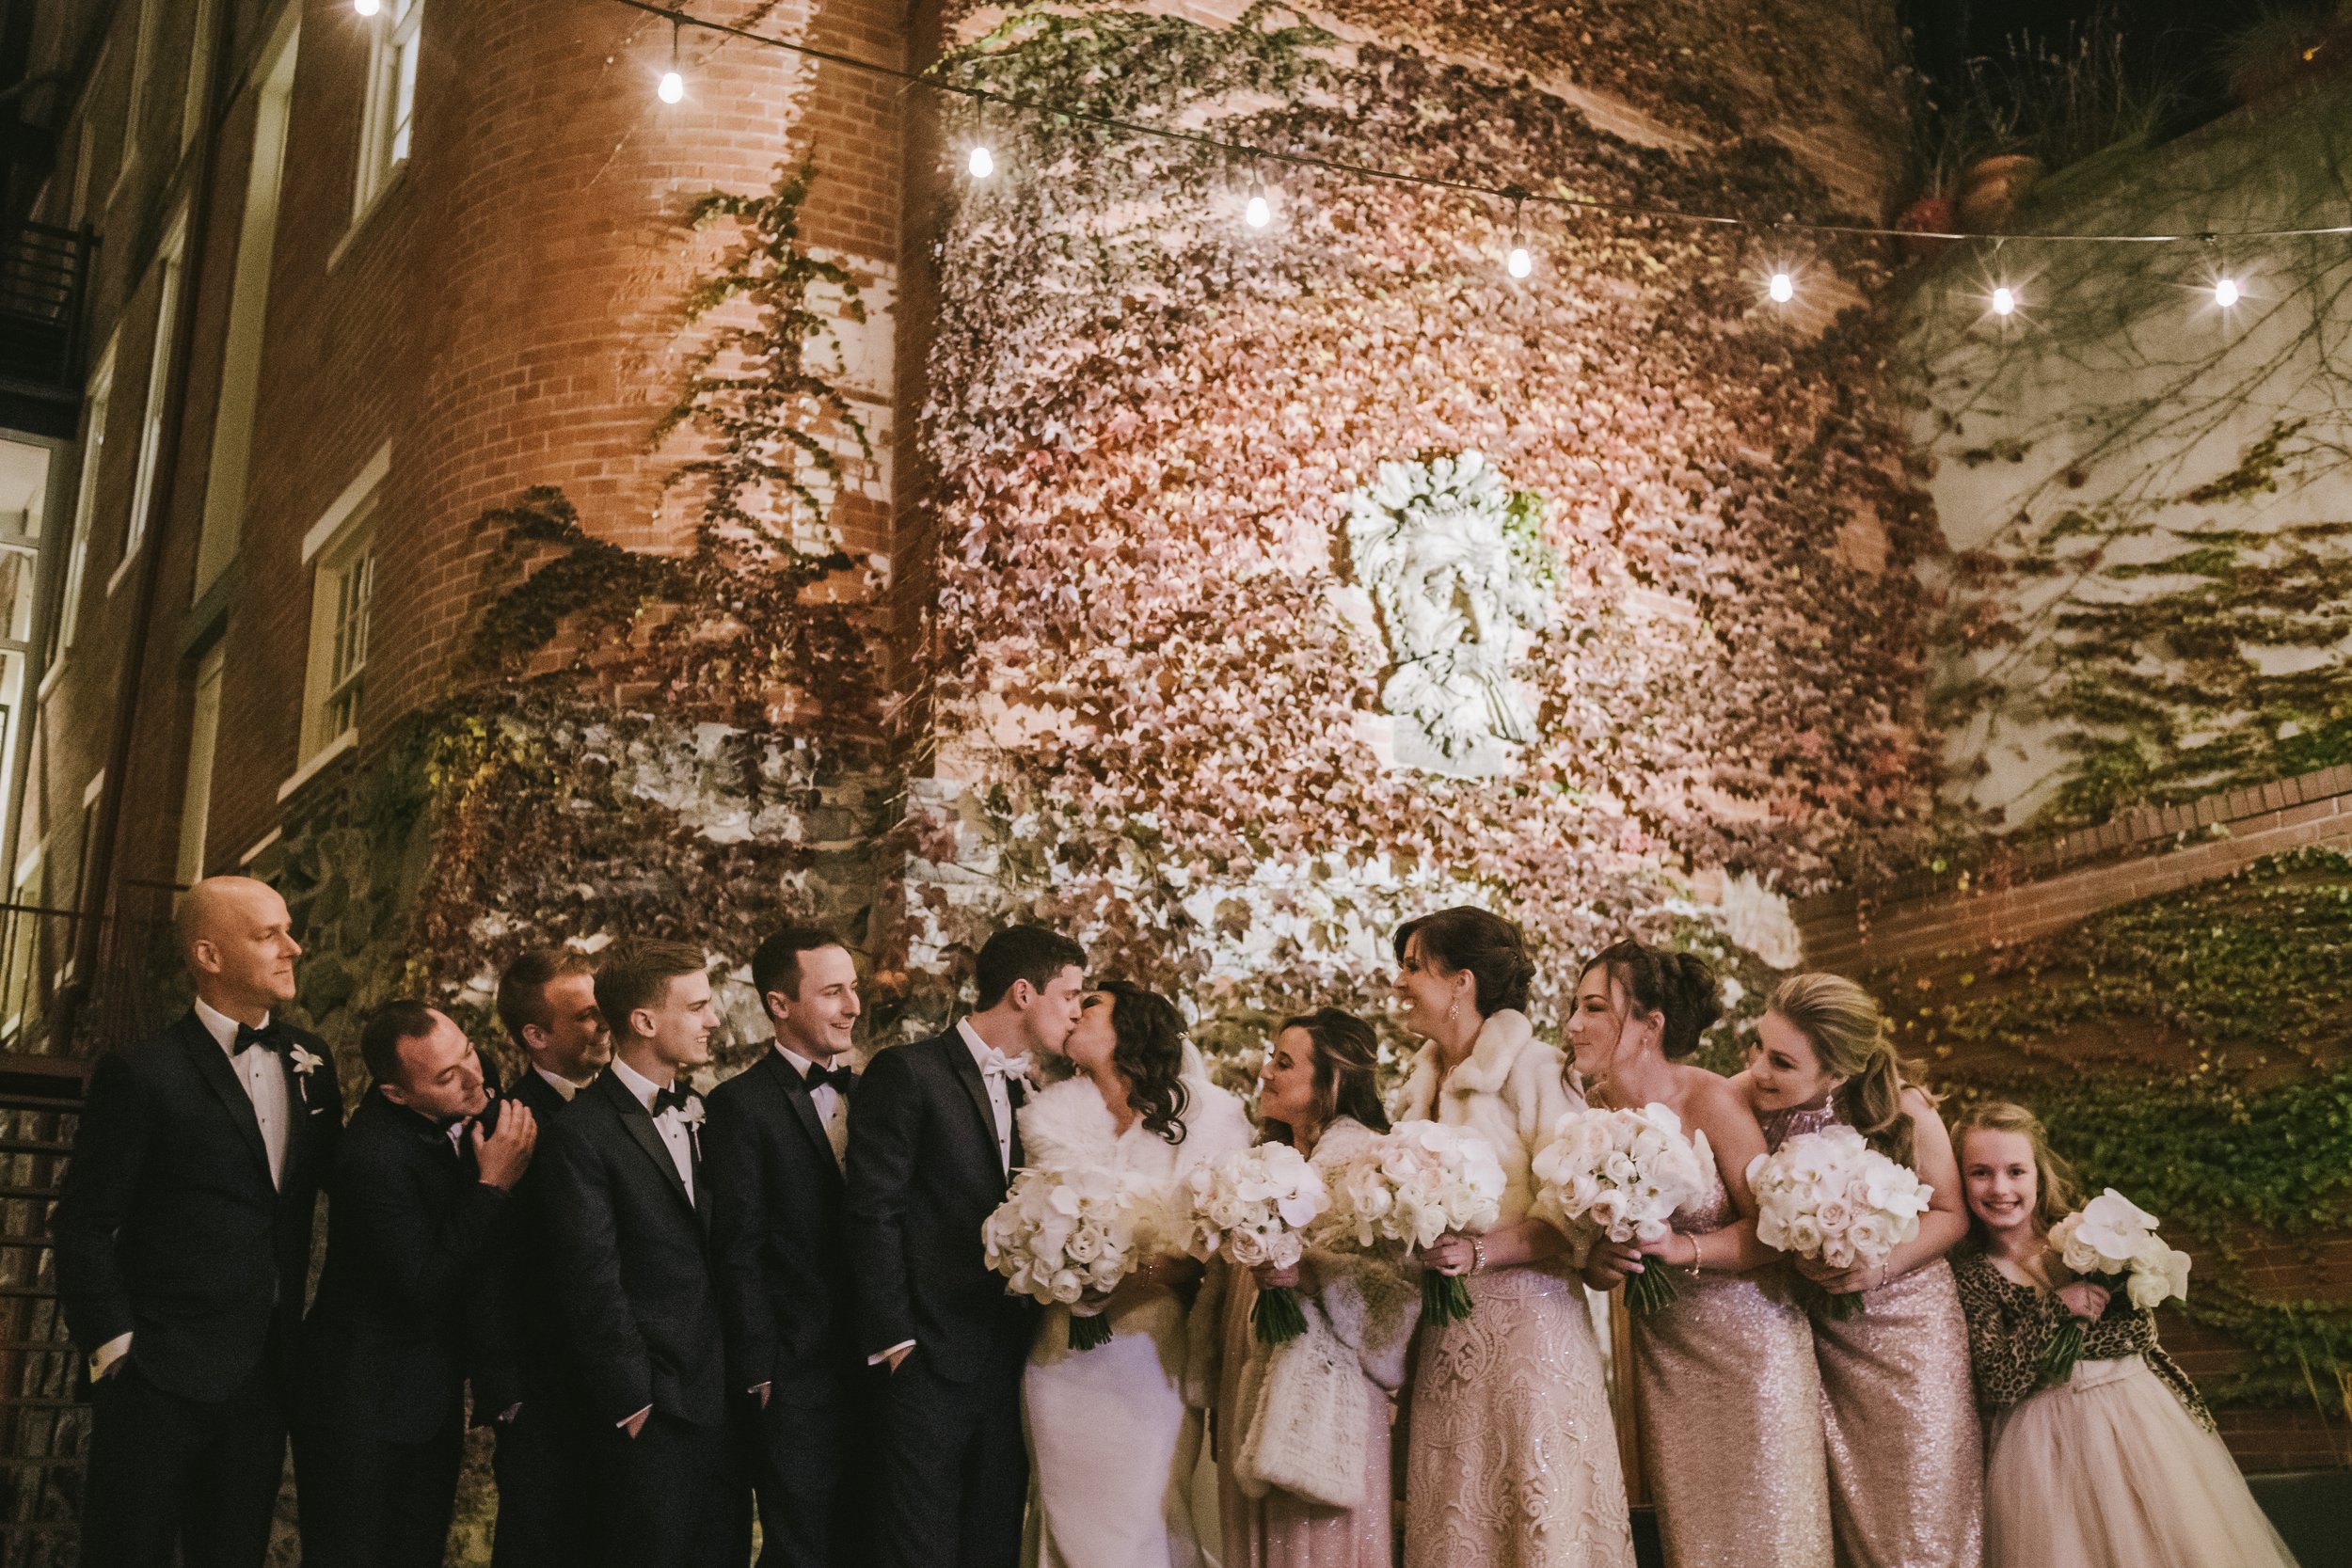 Bridal party outside under canopy lights